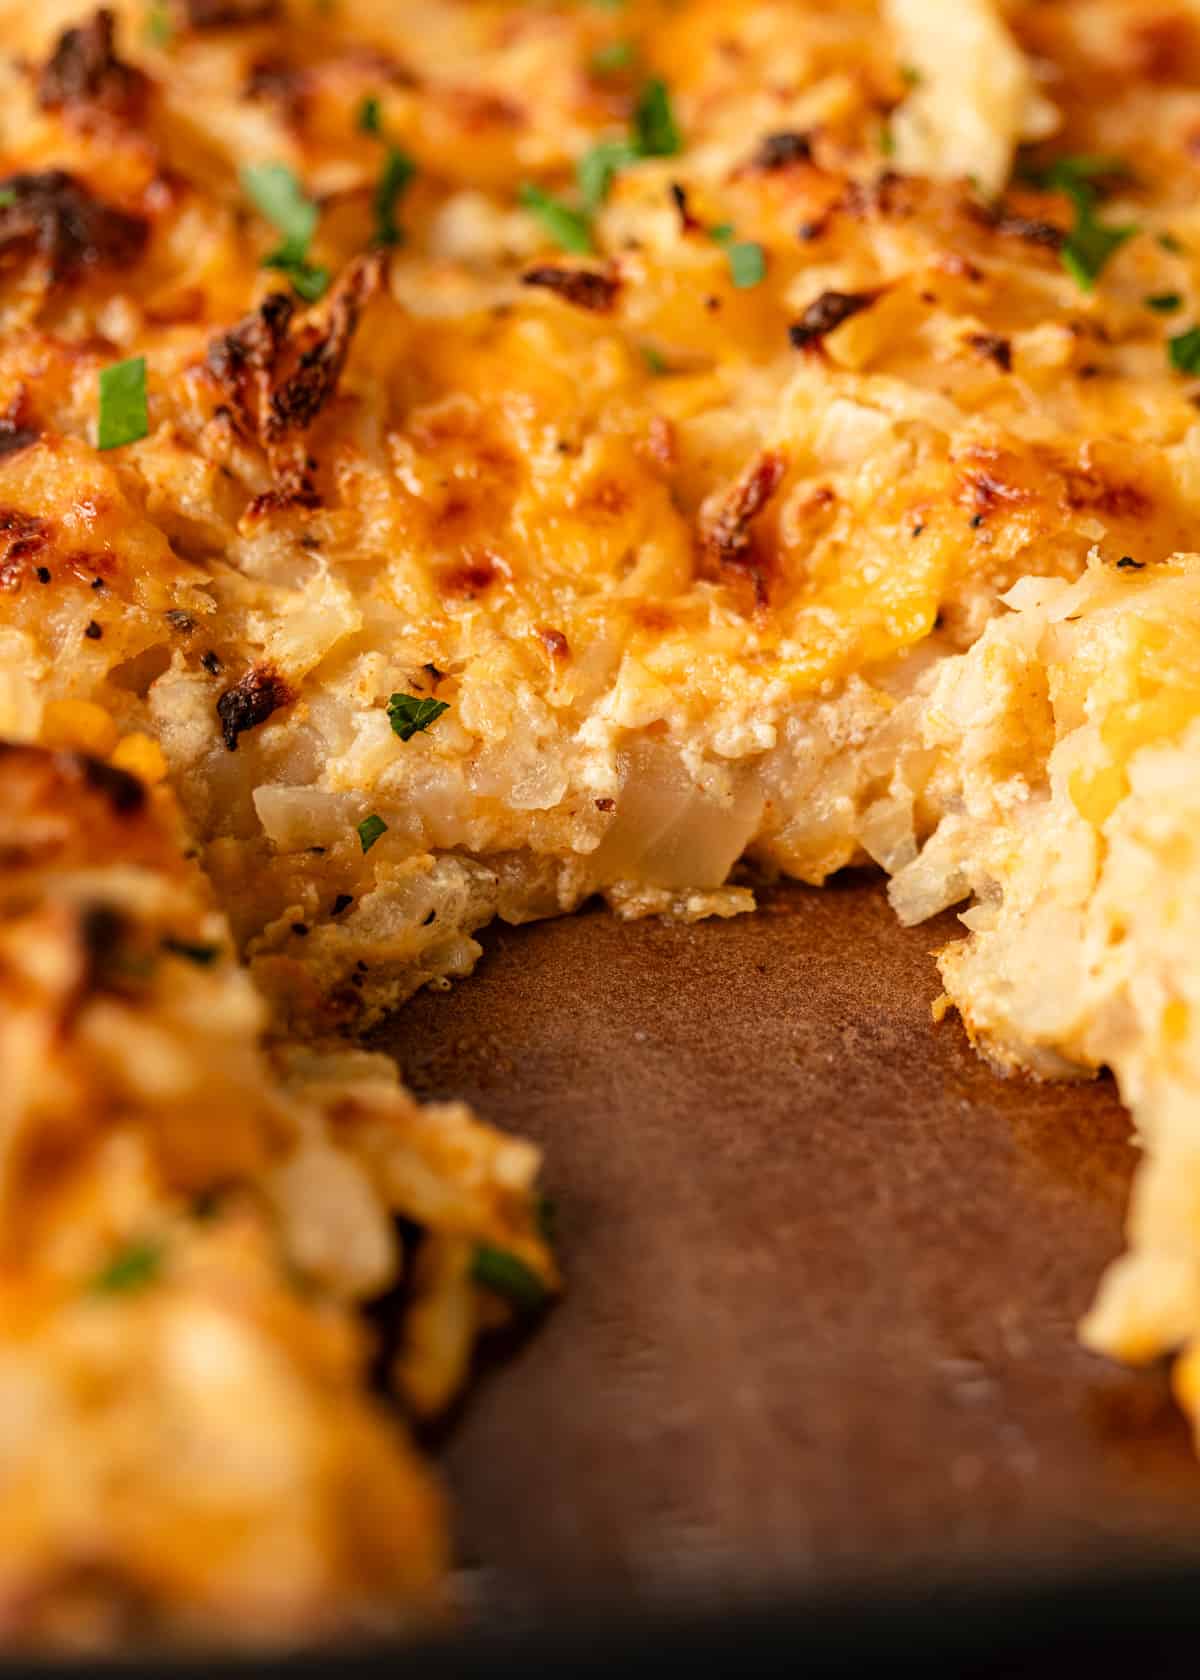 extreme closeup: hashbrown casserole with cheese